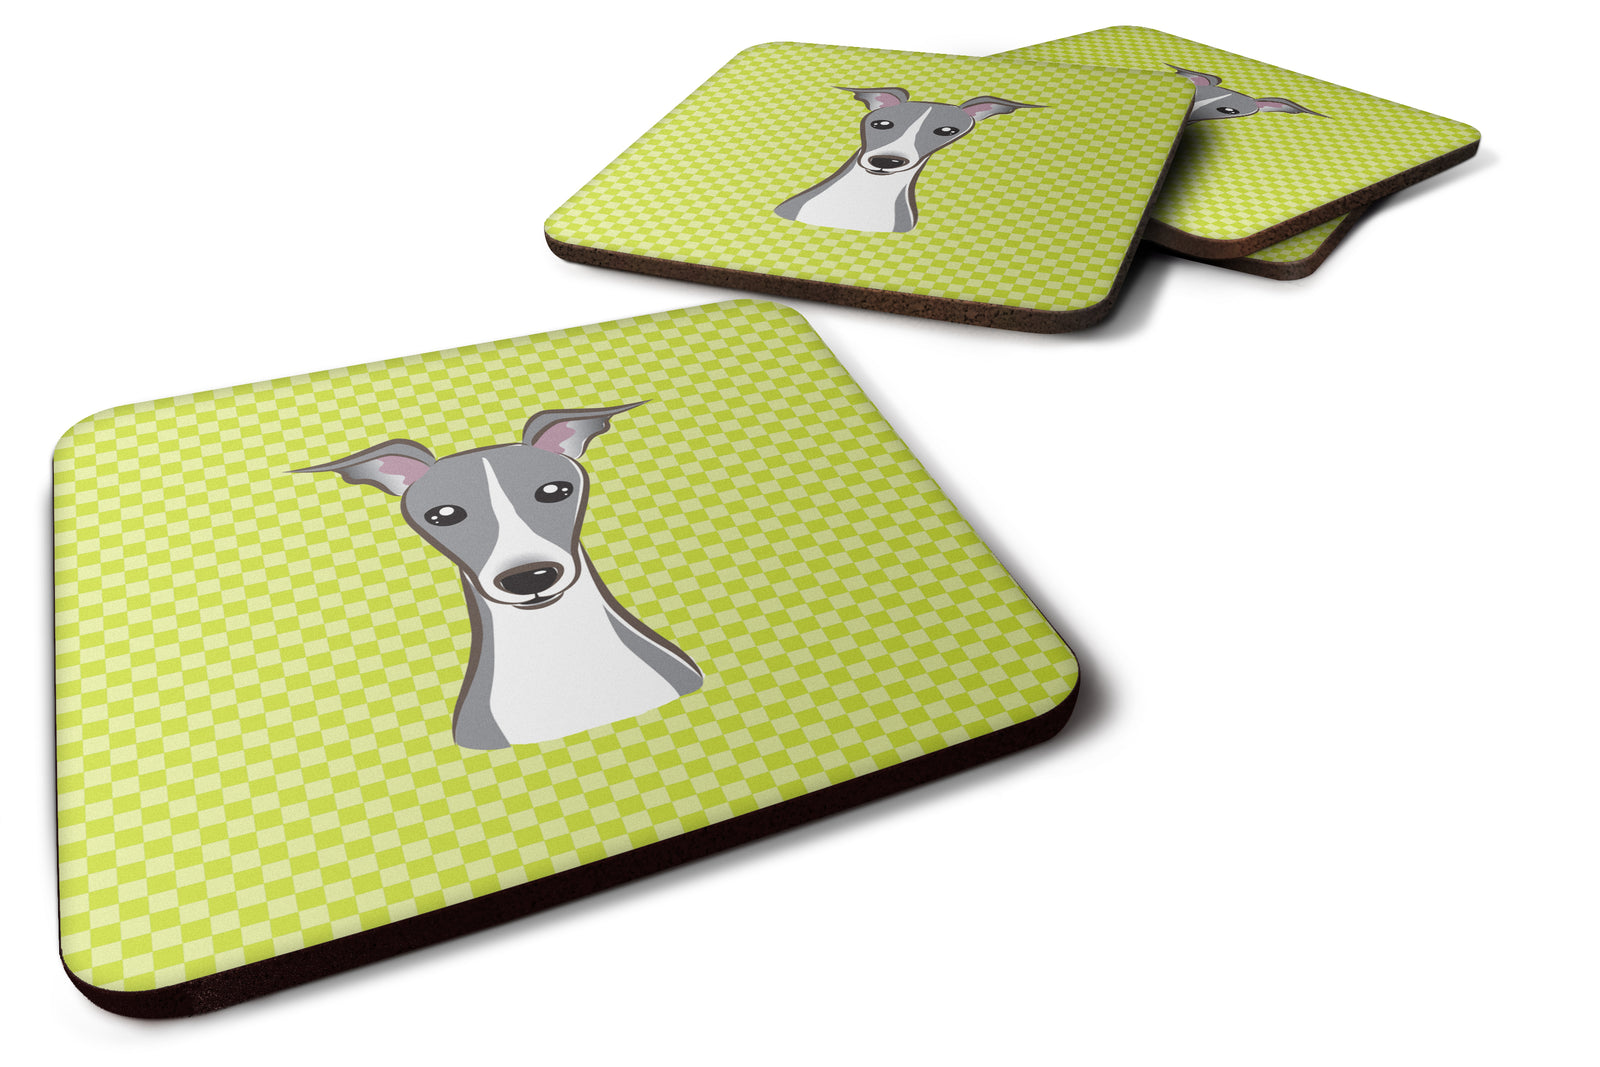 Set of 4 Checkerboard Lime Green Italian Greyhound Foam Coasters BB1298FC - the-store.com